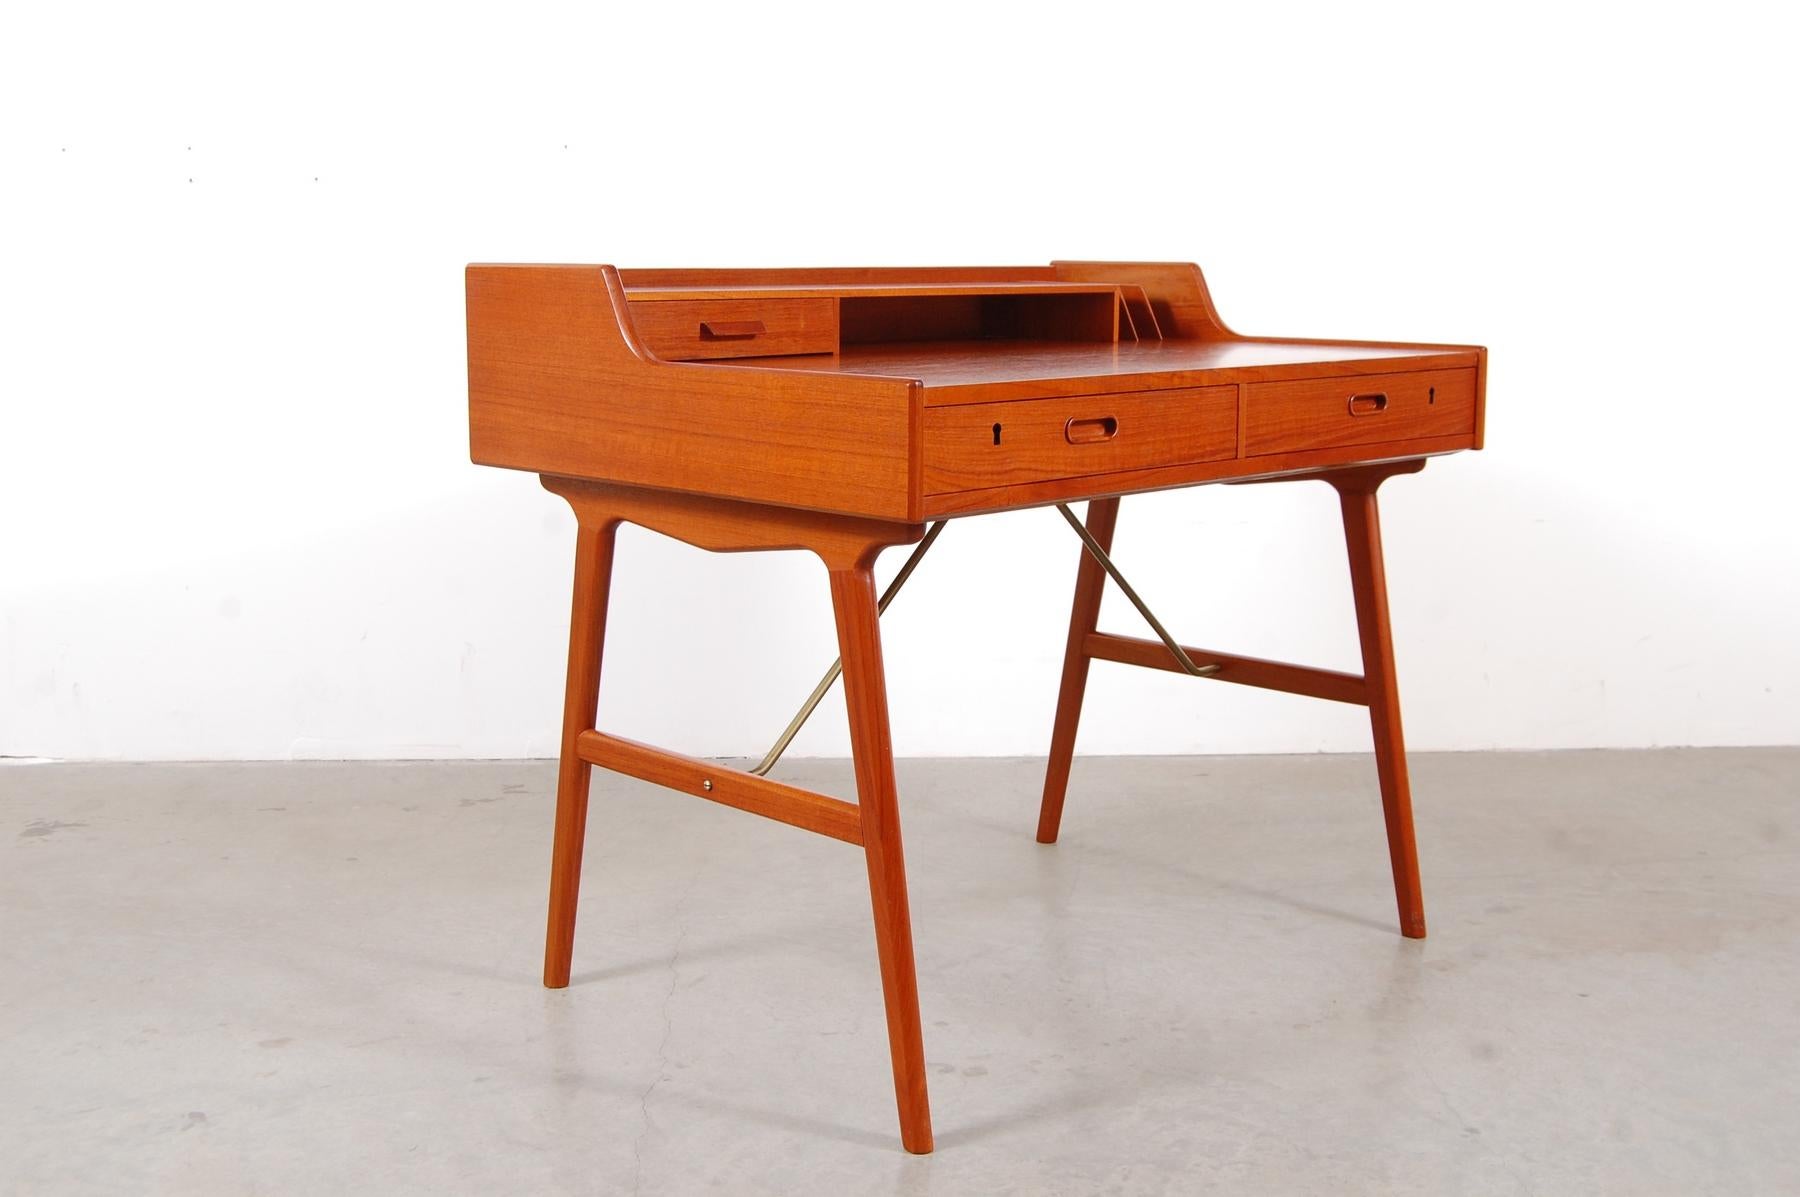 Wonderful Danish writing desk designed by Arne Wahl Iversen in 1961, model 56 for Vinde Møbelfabrik with splayed legs with solid brass stretchers, tabletop with drawer, storage shelf, and solid teak dividers for mail. Marked Danish design and